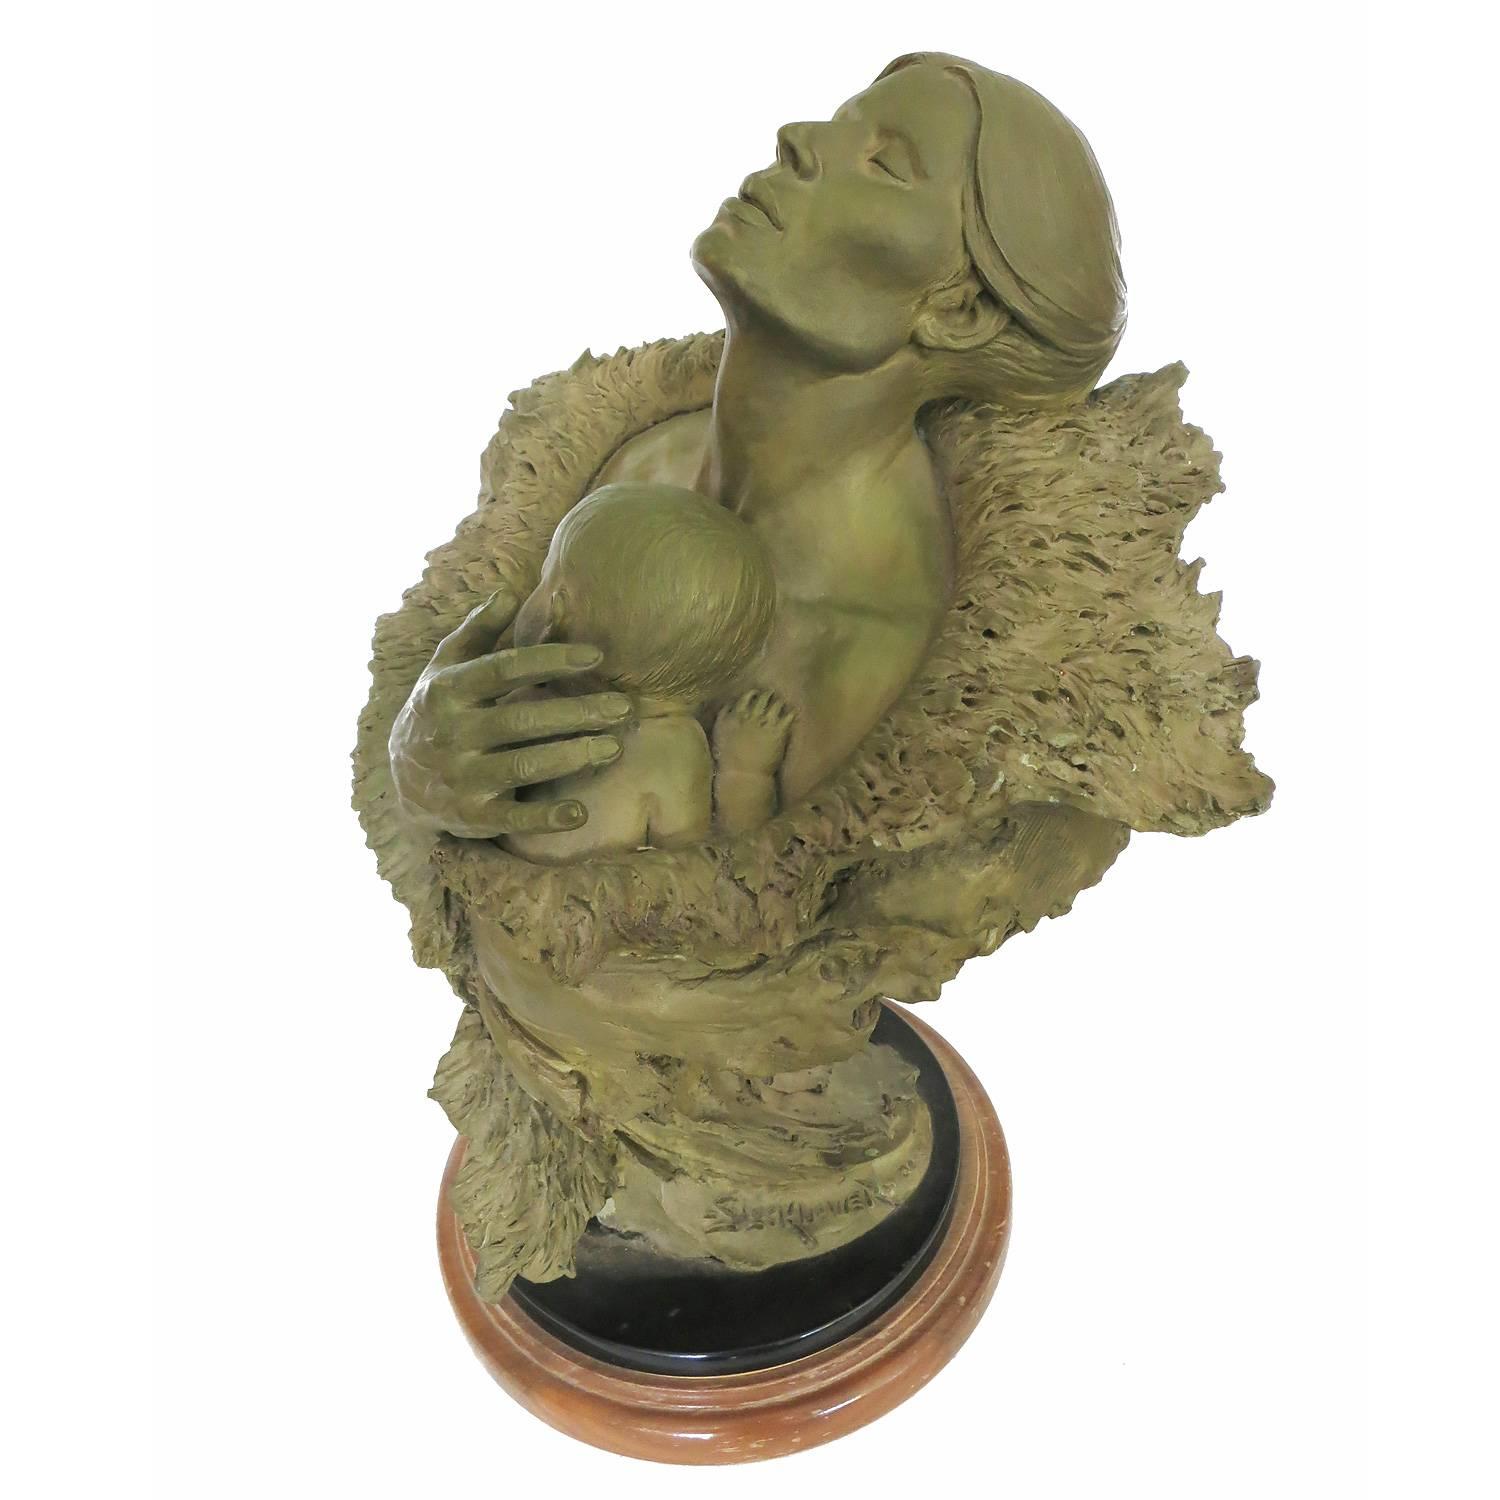 American Rare Mother and Child Sculpture Bust by Joe Slockbower for Mill Creek Studios For Sale